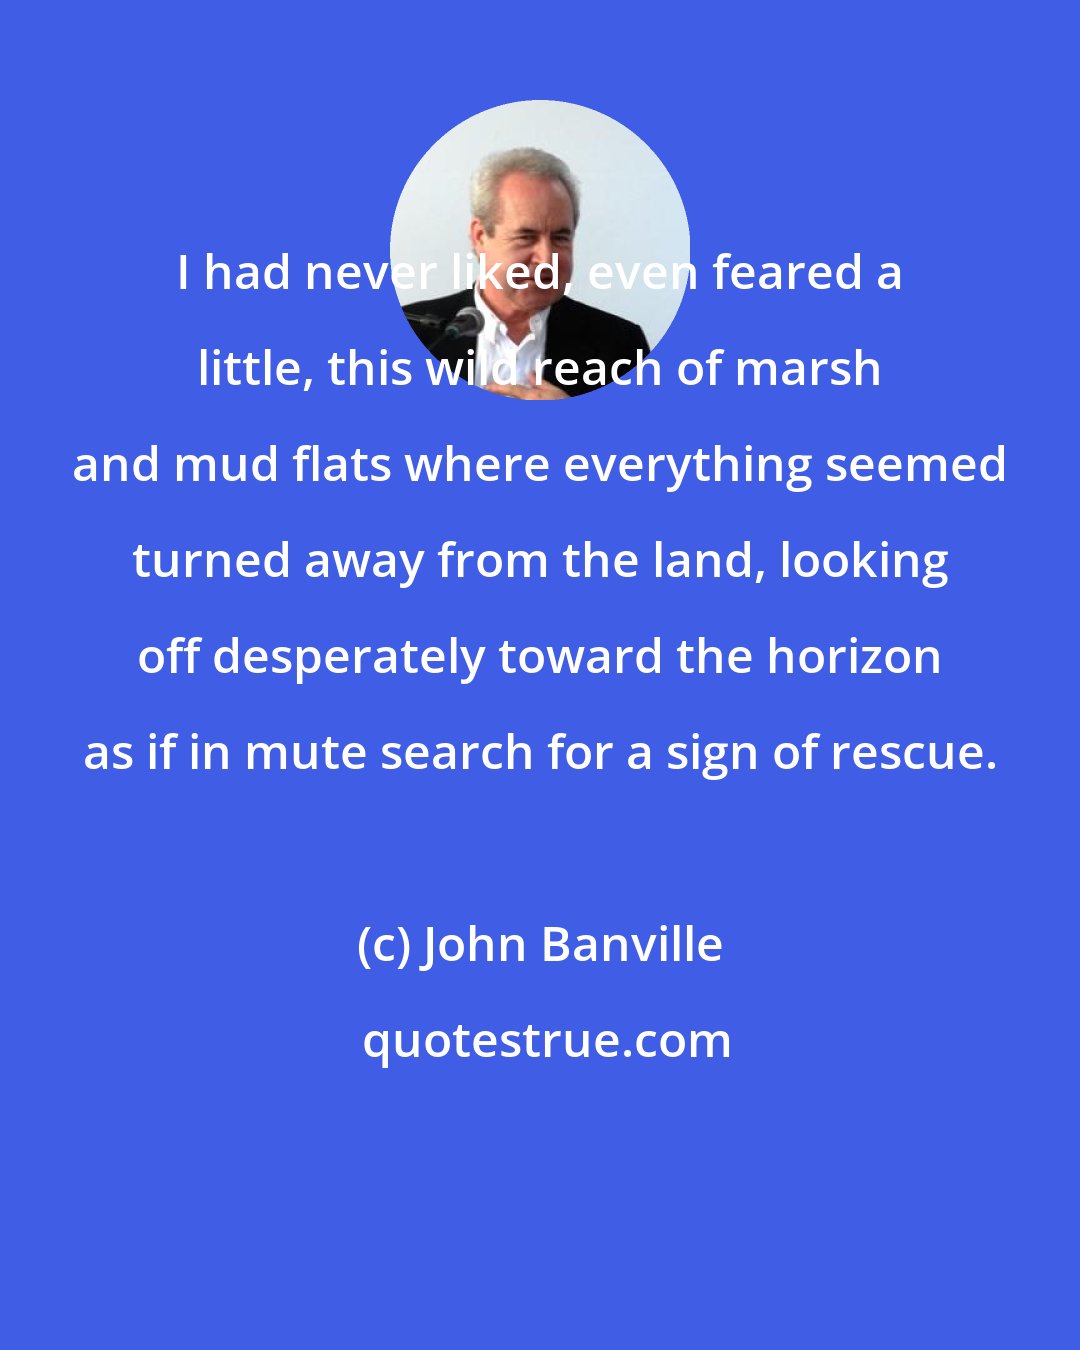 John Banville: I had never liked, even feared a little, this wild reach of marsh and mud flats where everything seemed turned away from the land, looking off desperately toward the horizon as if in mute search for a sign of rescue.